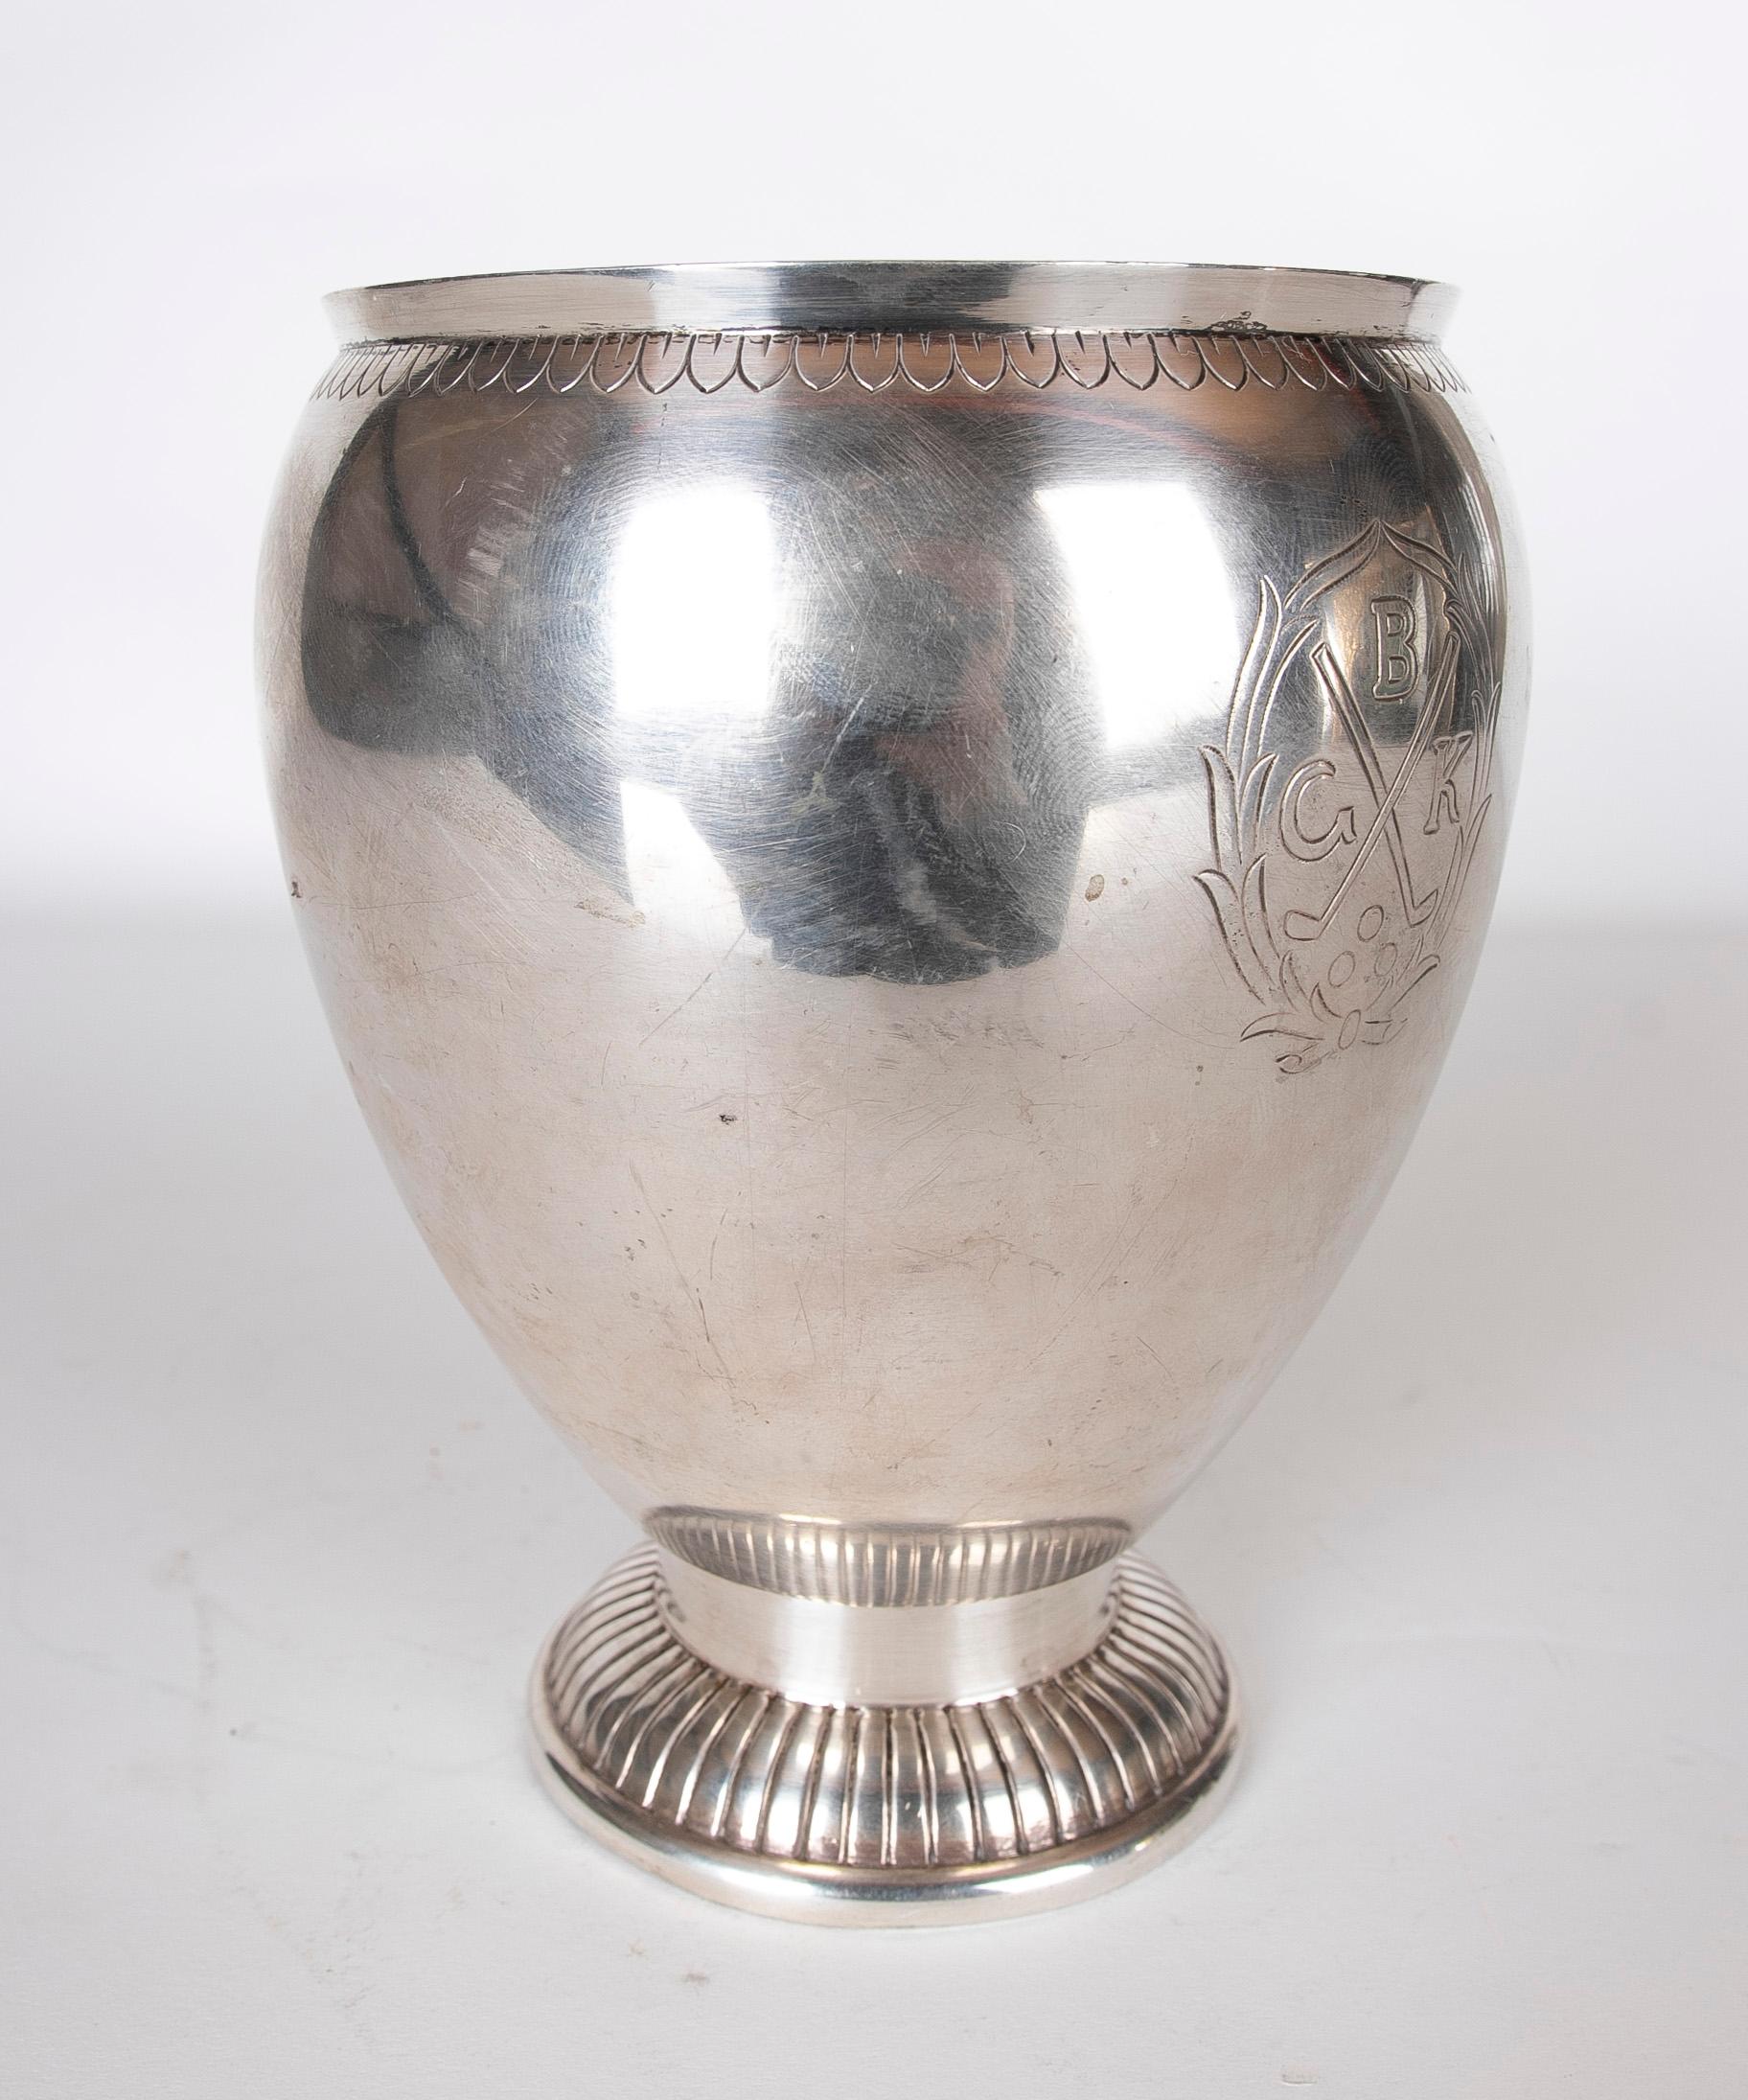 A silver cup from the Russian House of Bolin with shield decoration and lettering. 
The House of Bolin is one of the oldest Russian silver and jewellery firms to survive after the Russian Revolution and is still run by the founding family. The